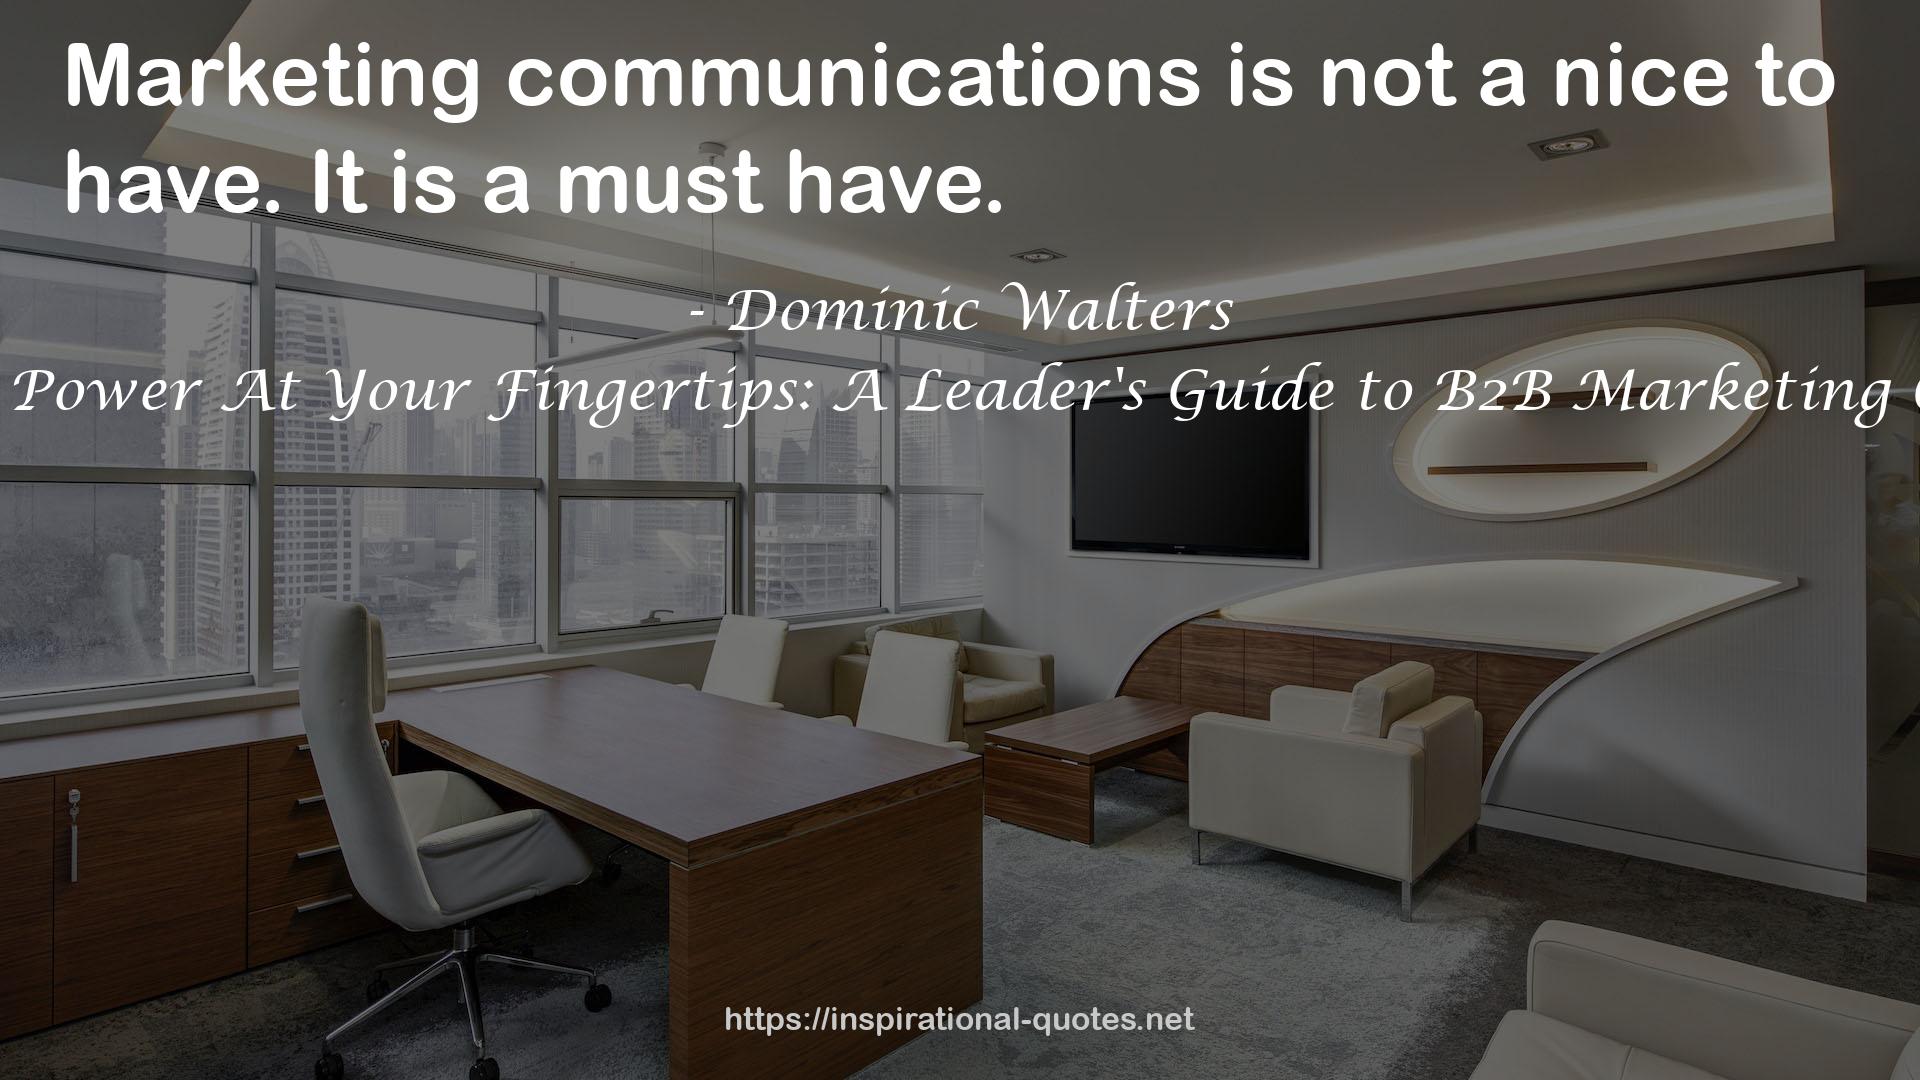 Harnessing the Power At Your Fingertips: A Leader's Guide to B2B Marketing Communication QUOTES